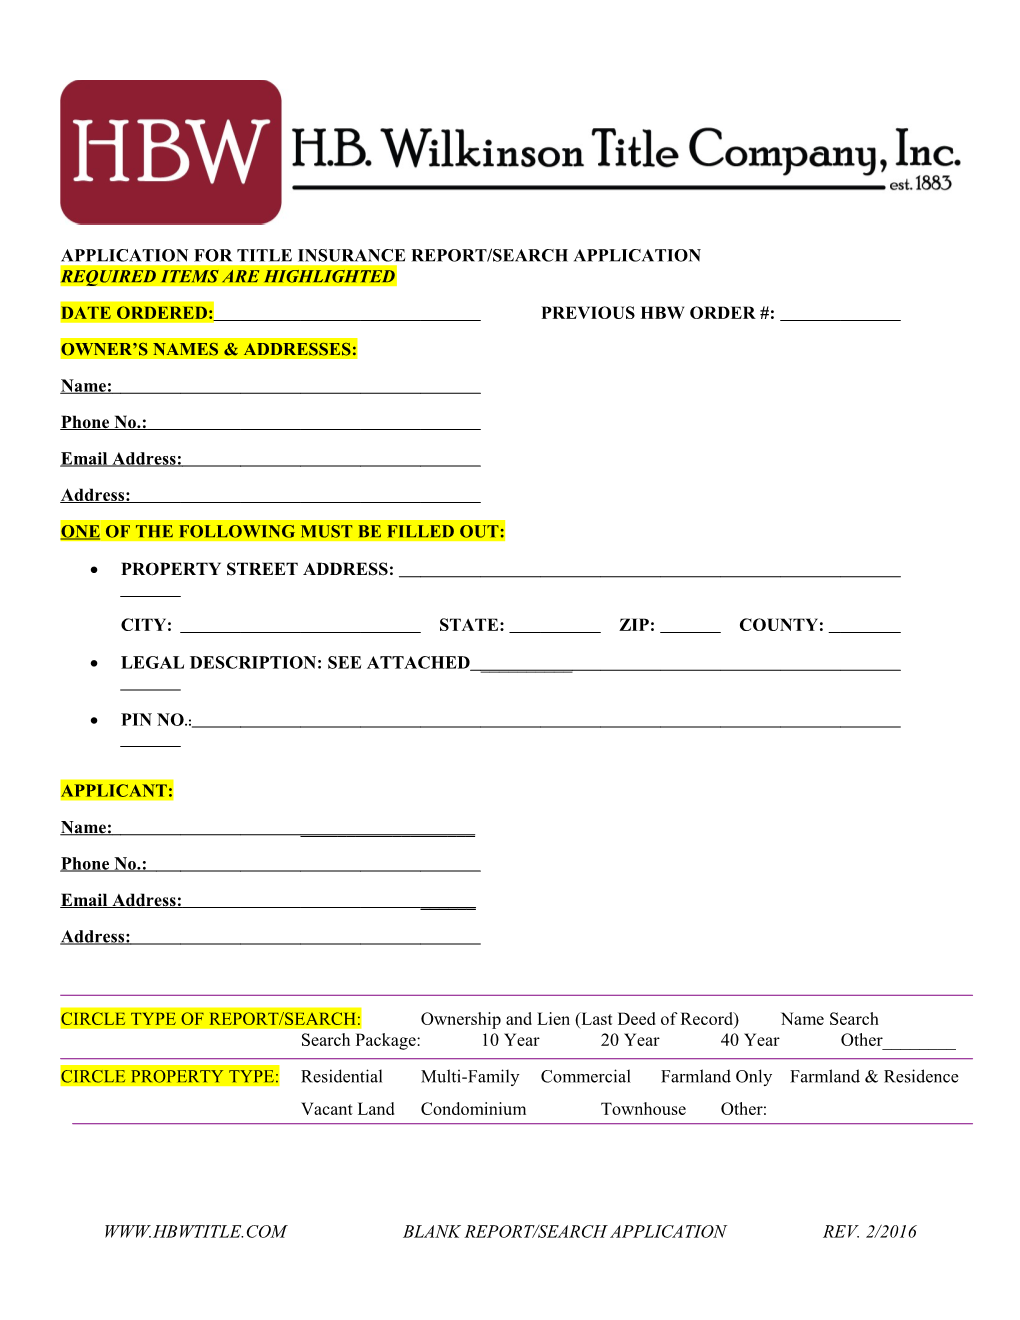 Application for Title Insurance